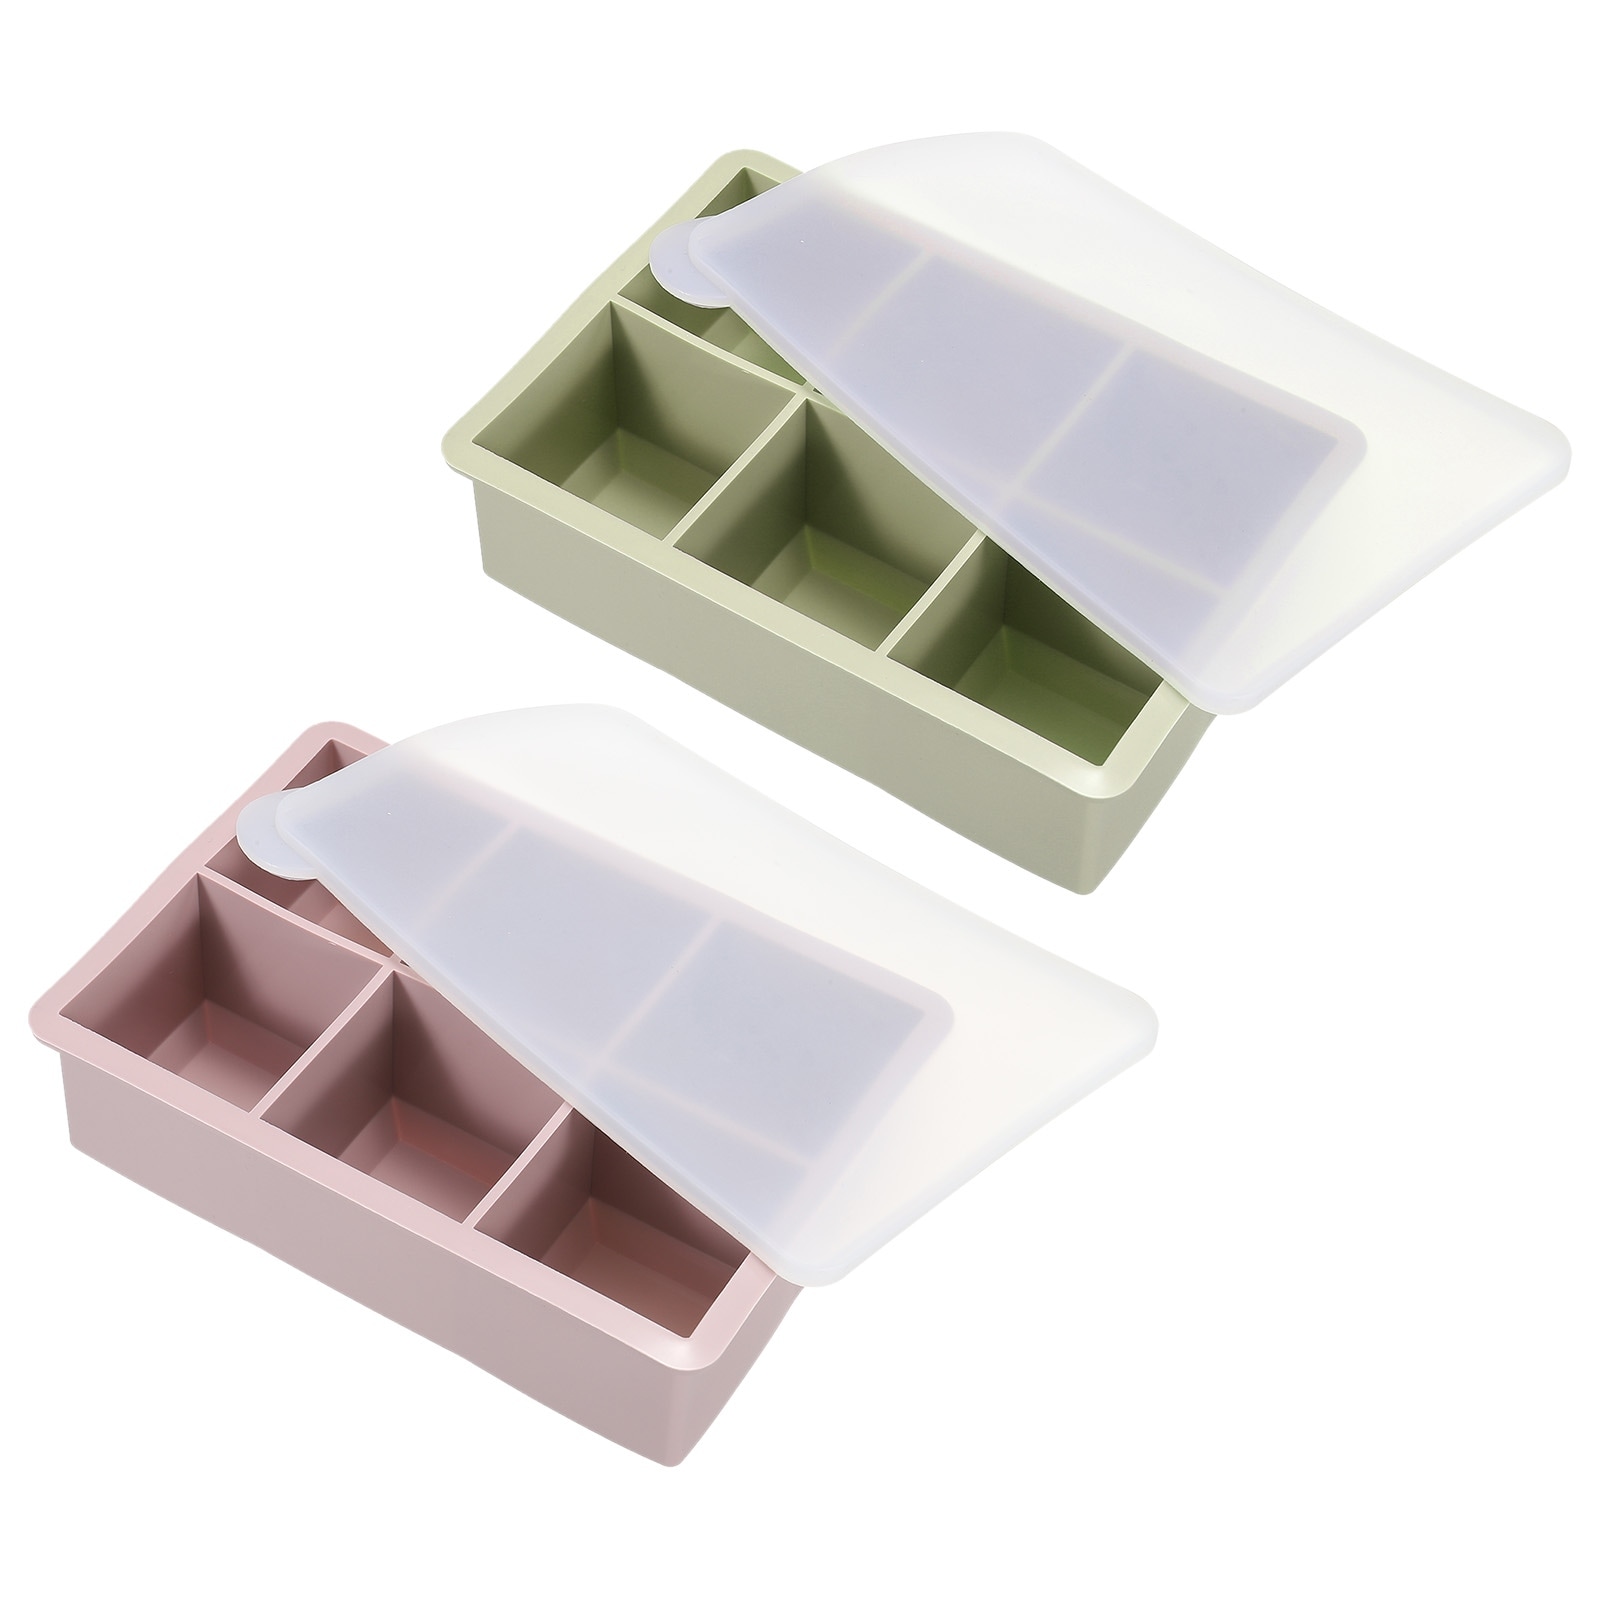 Ice Cube Mold(Set of 2), 6x2 Inch Silicone Ice Cube Tray with  Lid(Green,Pink) - Green, Pink - Bed Bath & Beyond - 37973946